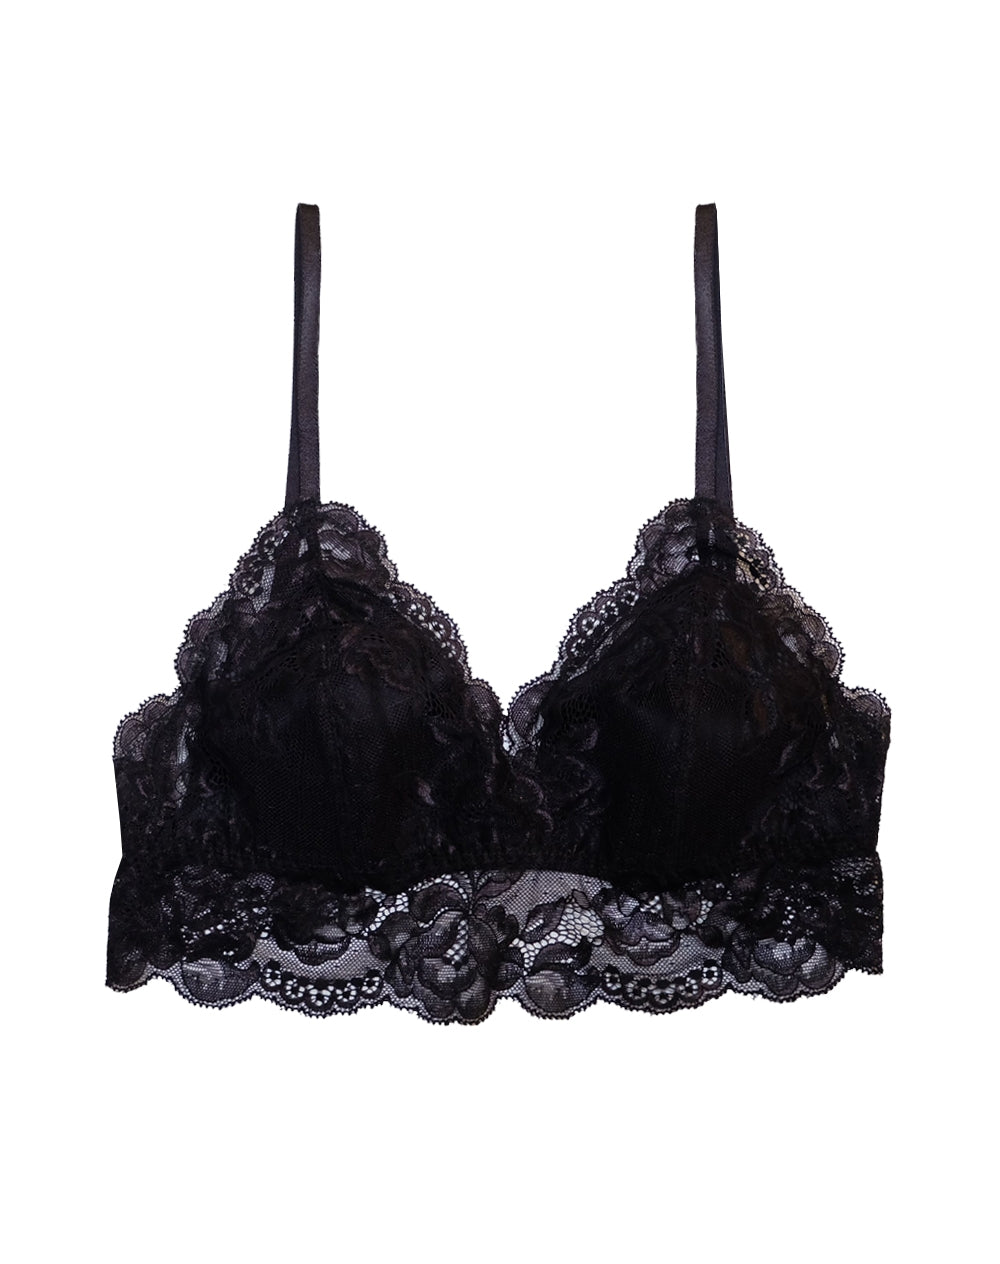 NICOLE BRA EXTENDED UNDERBAND (OUT OF STOCK)